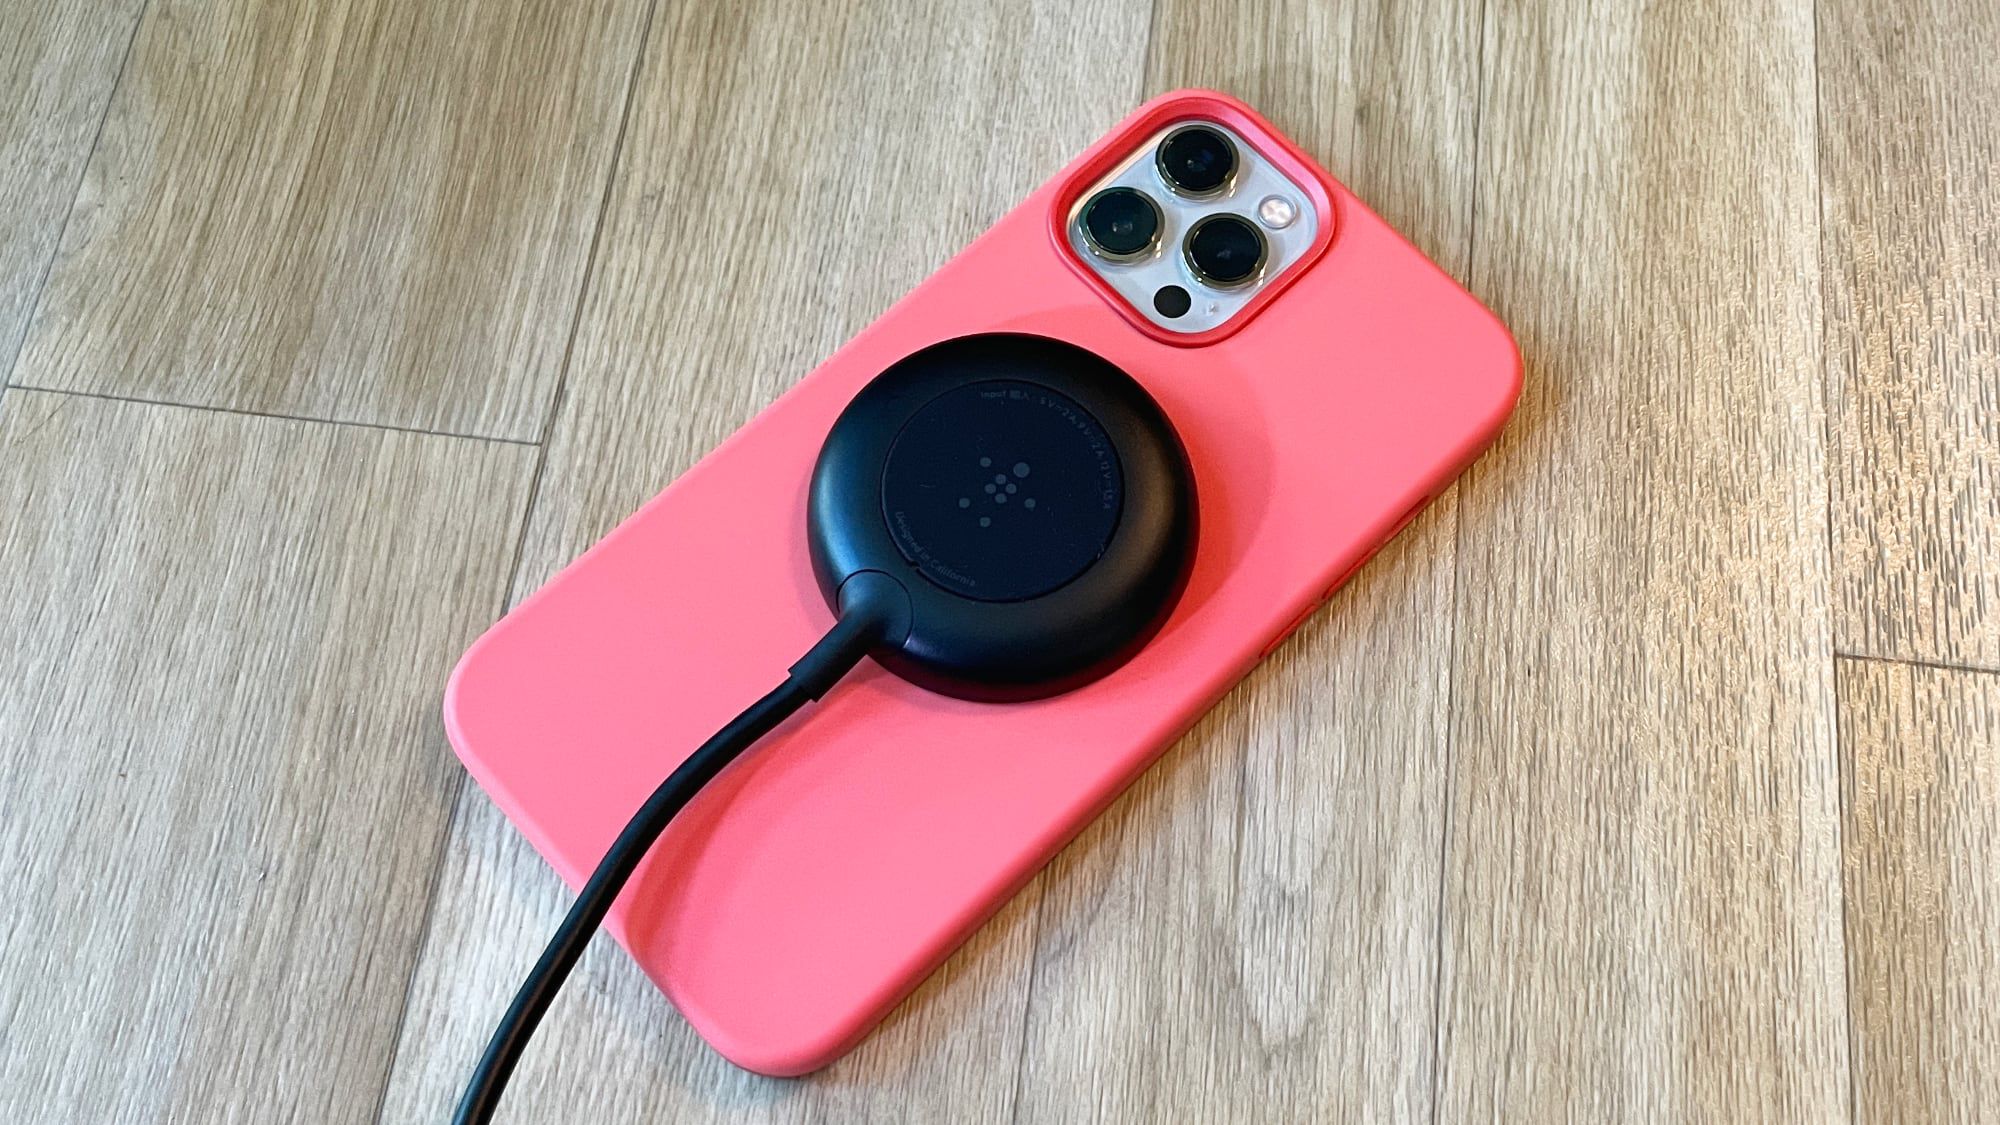 Boost Charge Magnetic Portable Wireless Charger Pad Review - MacRumors